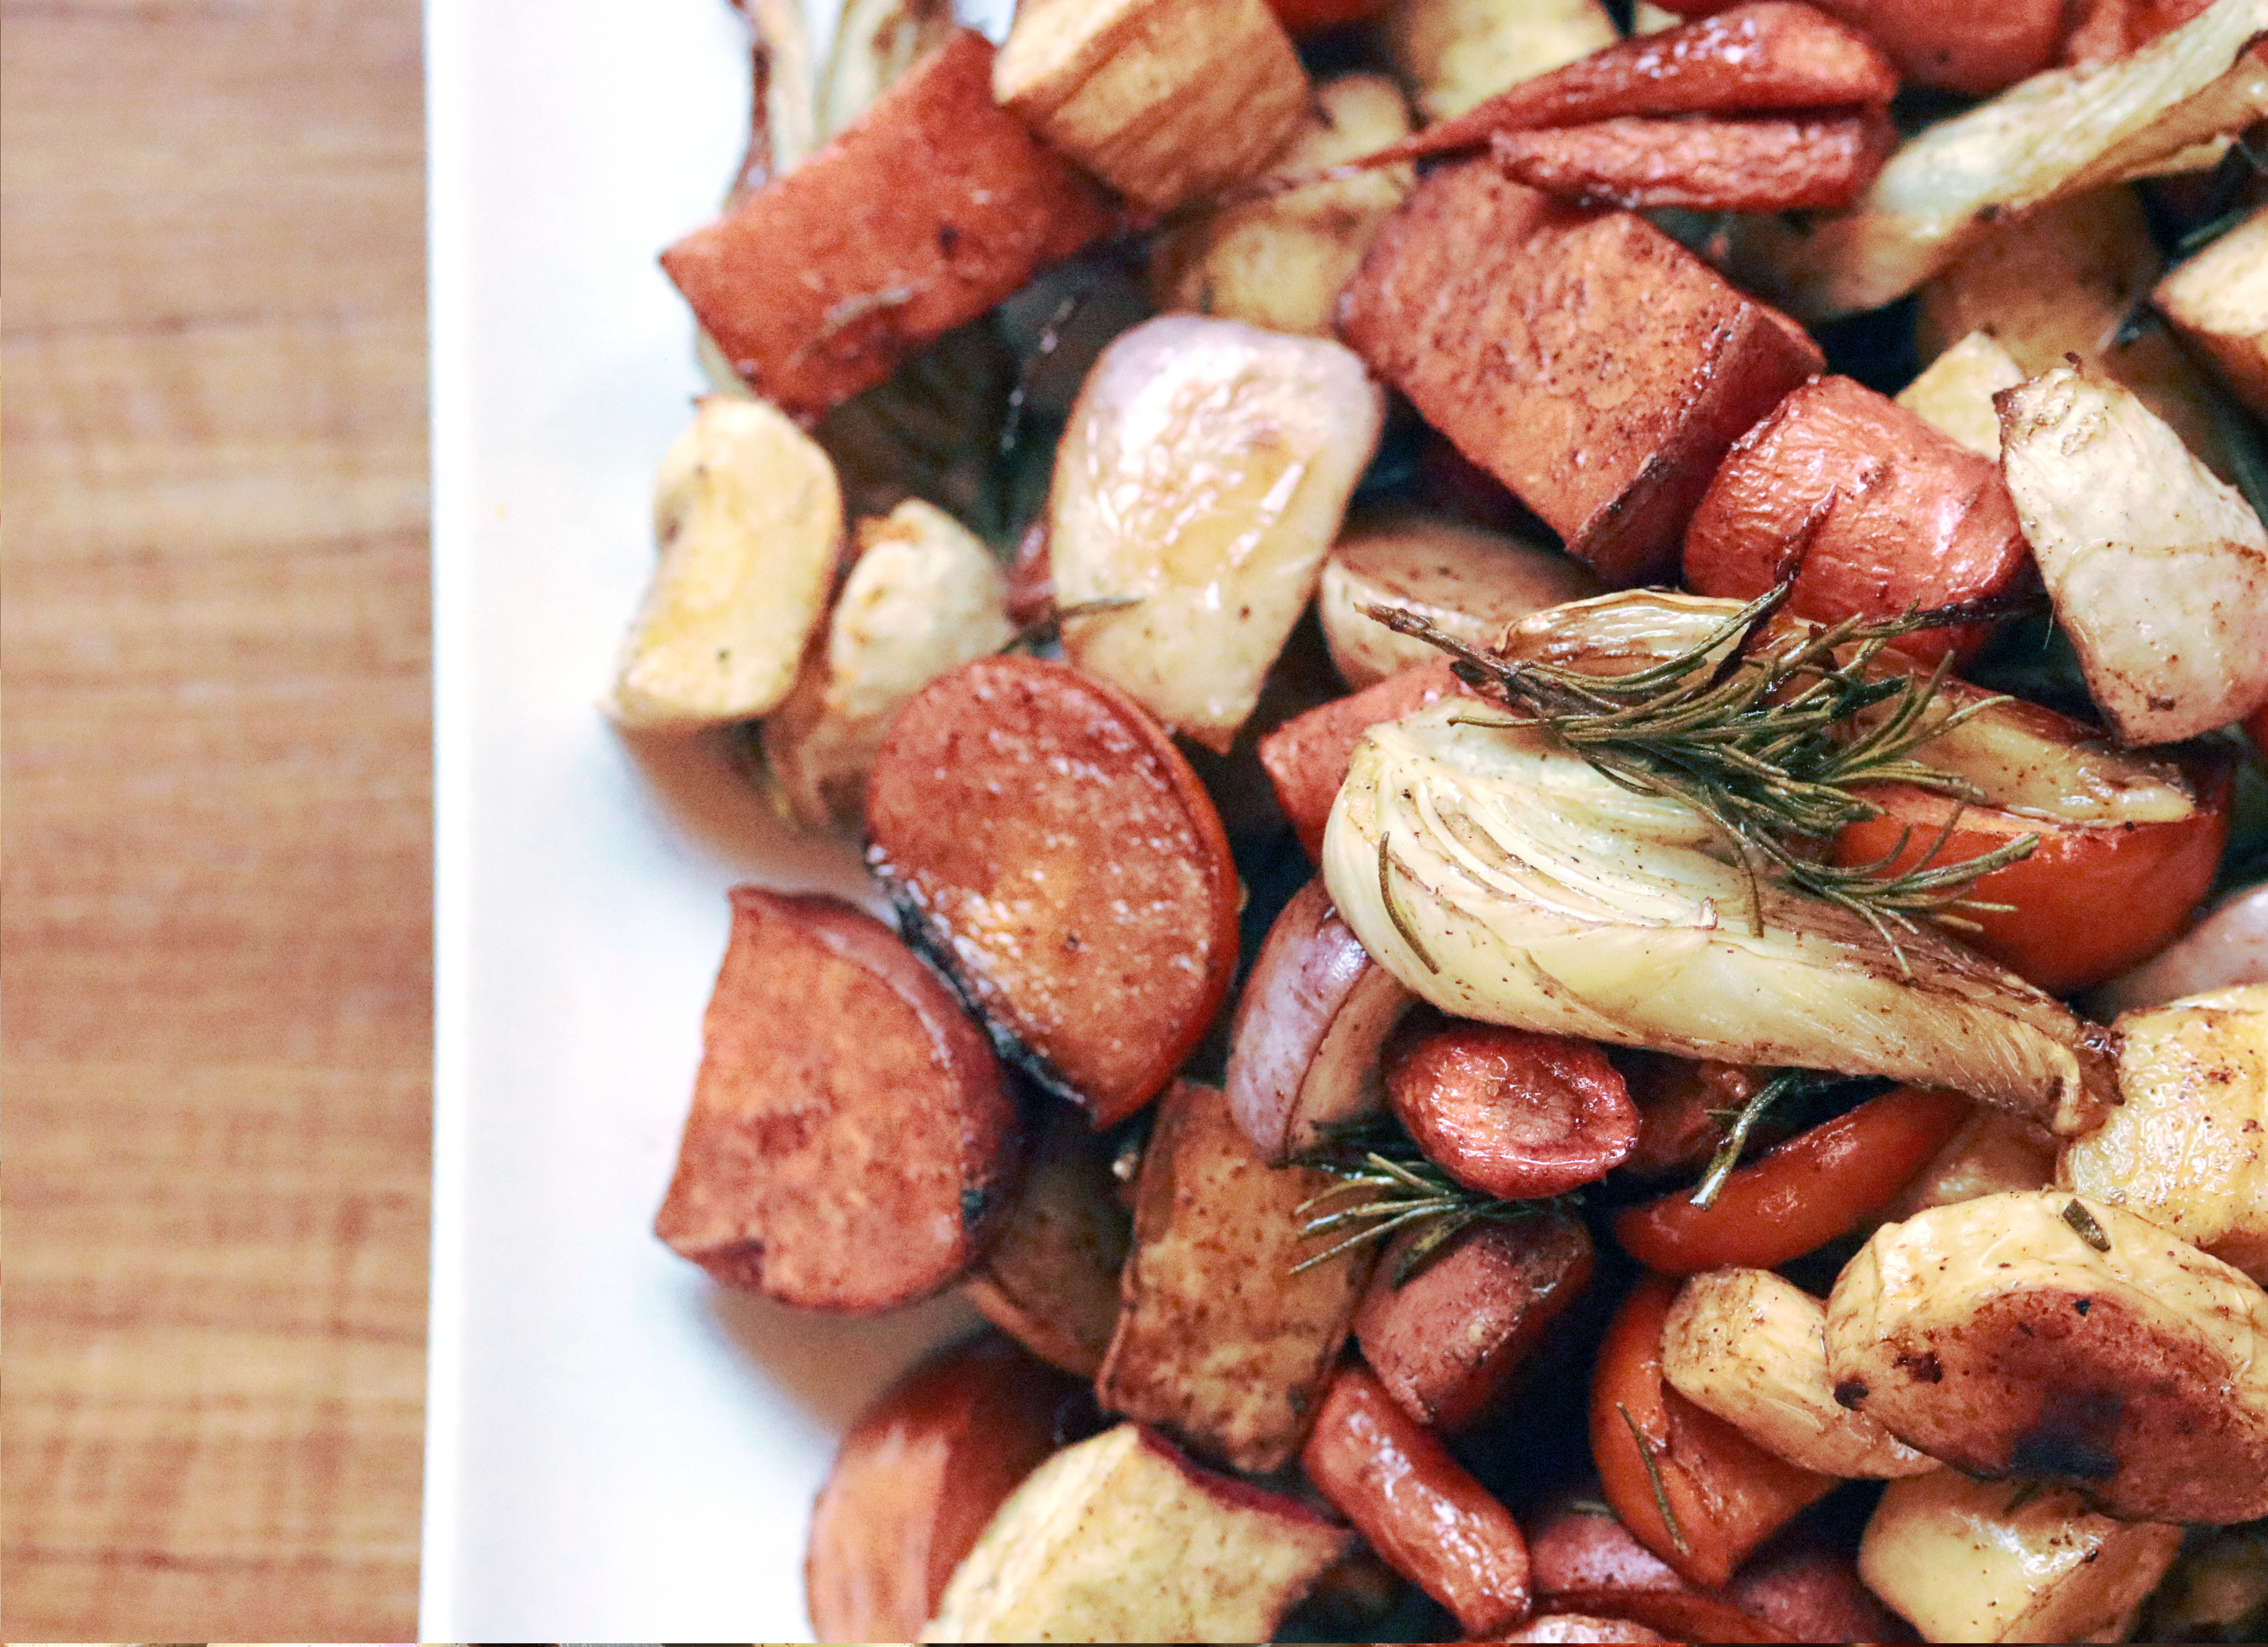 Roasted root vegetables with fennel and persimmons4